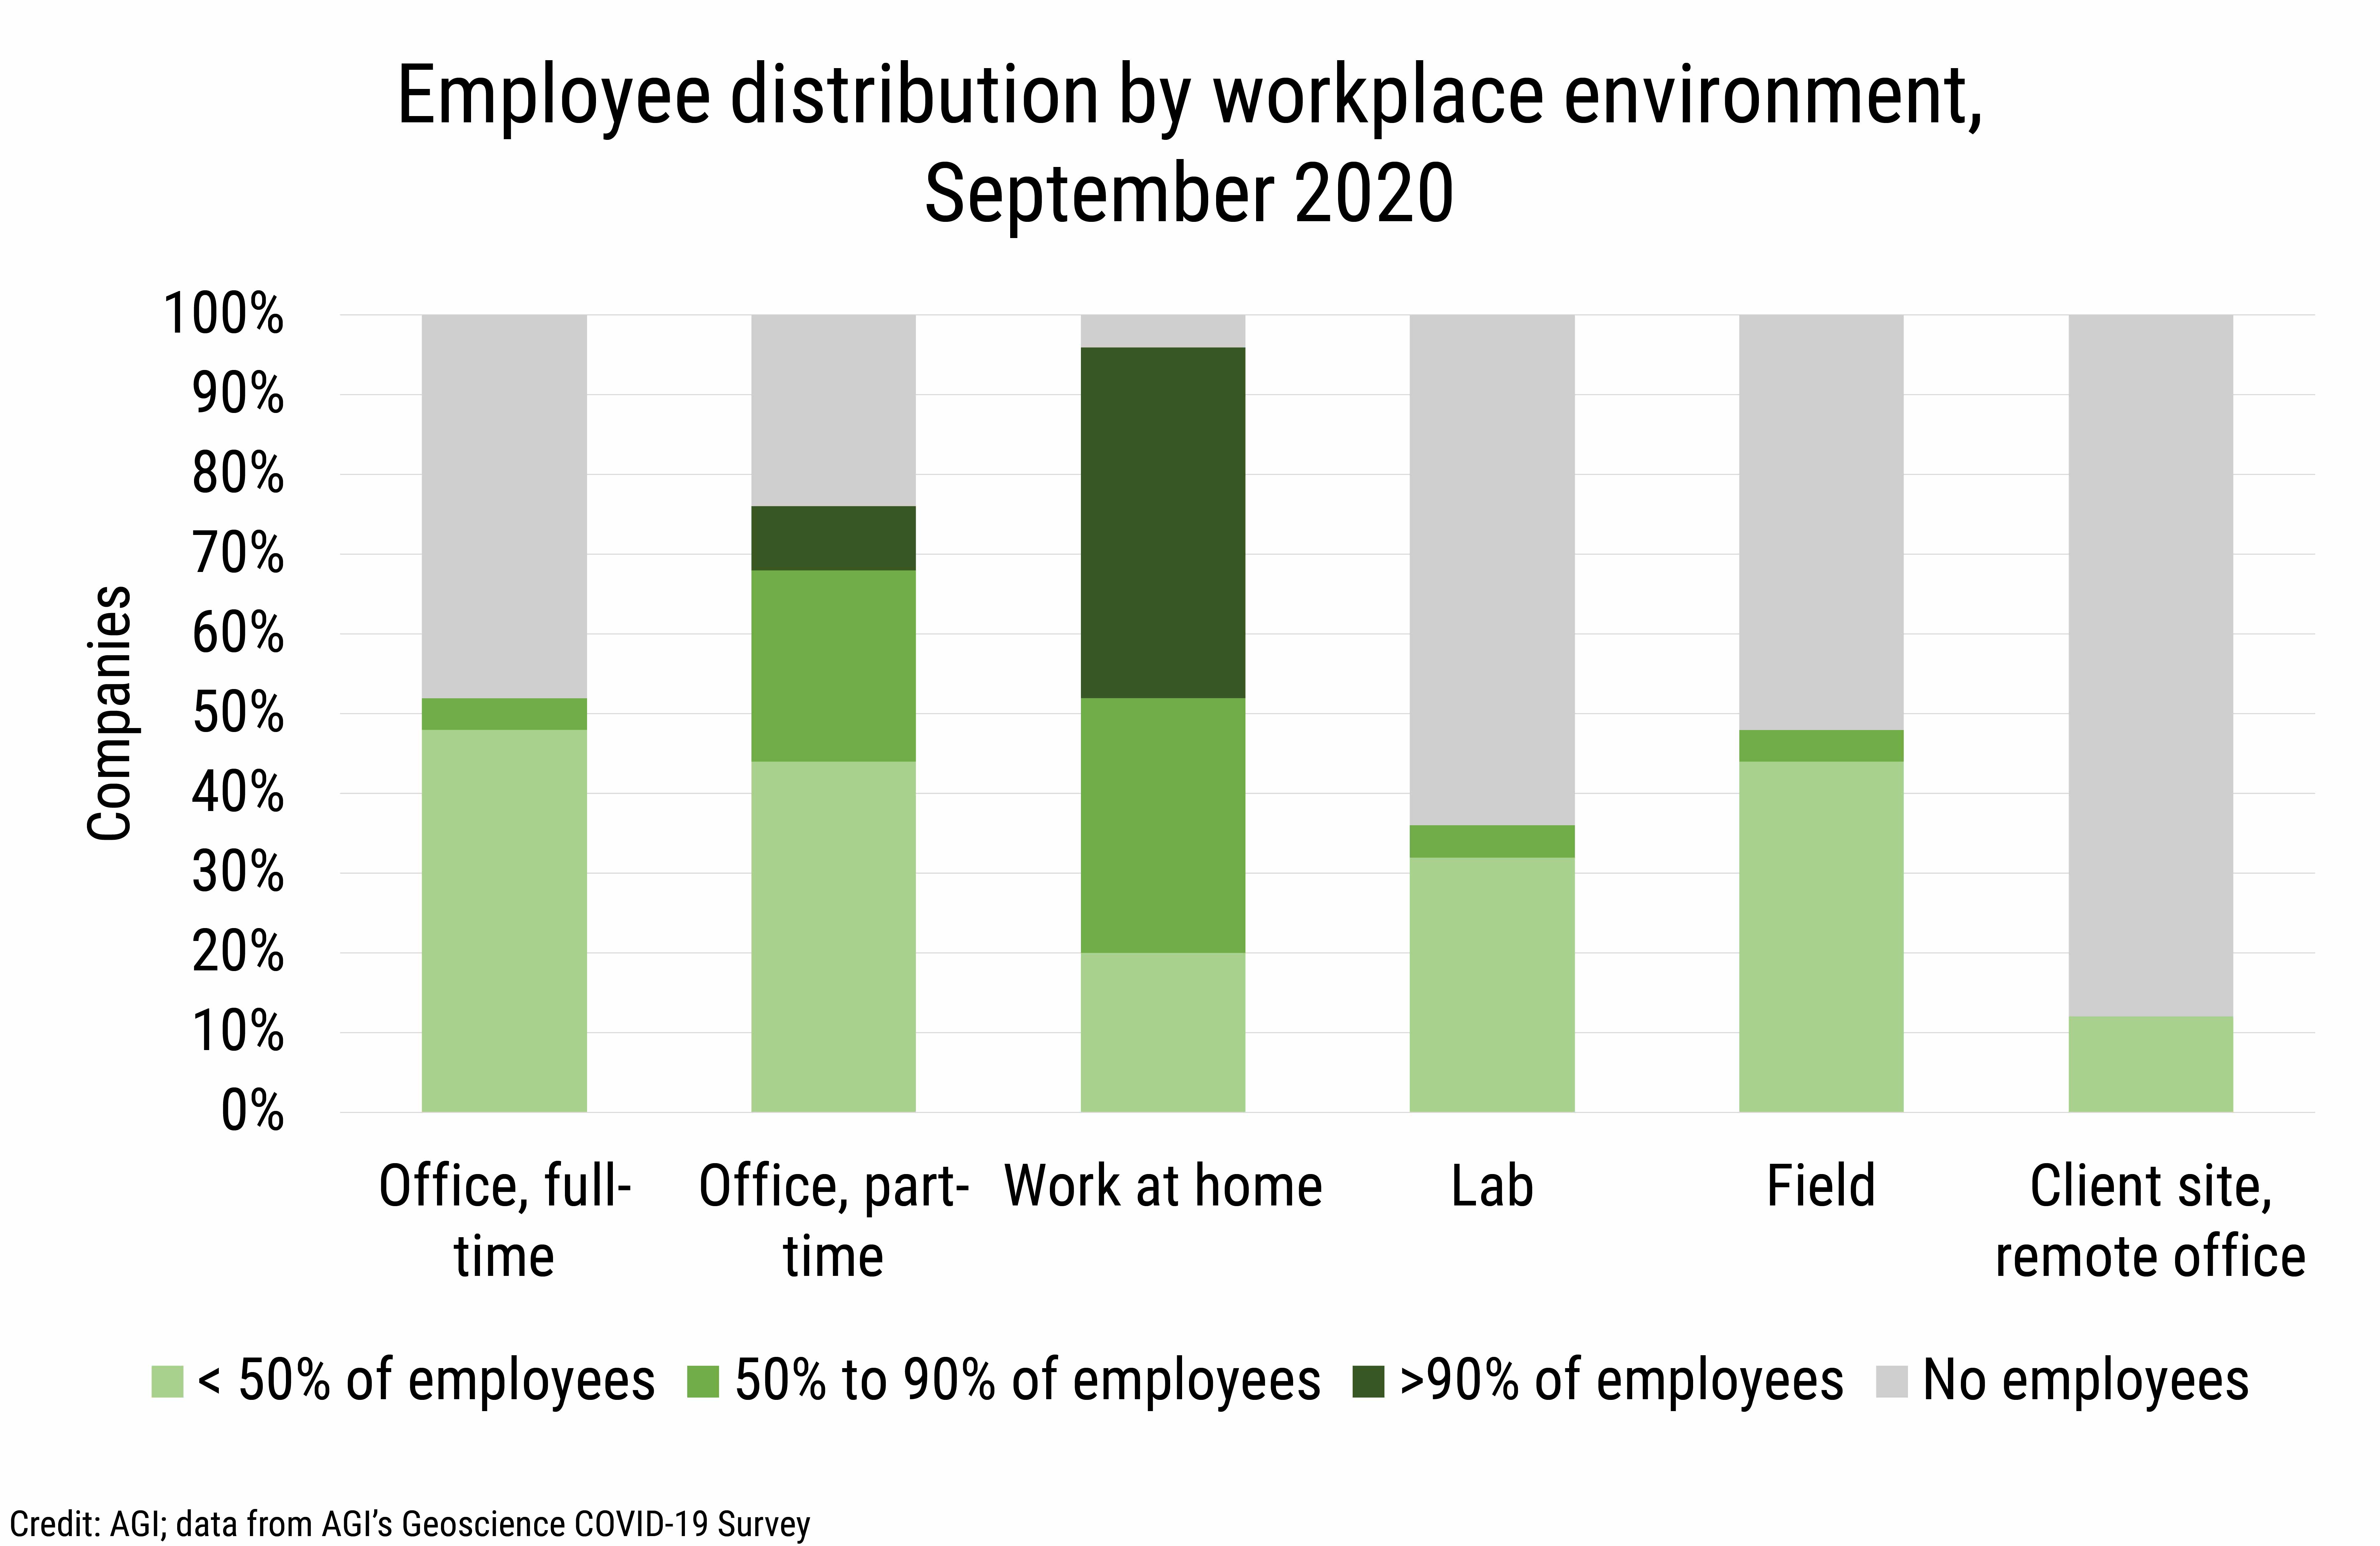 DB_2021-005_chart05: Employee distribution by workplace environment, September 2020 (Credit: AGI; data from AGI's Geoscience COVID-19 Survey)